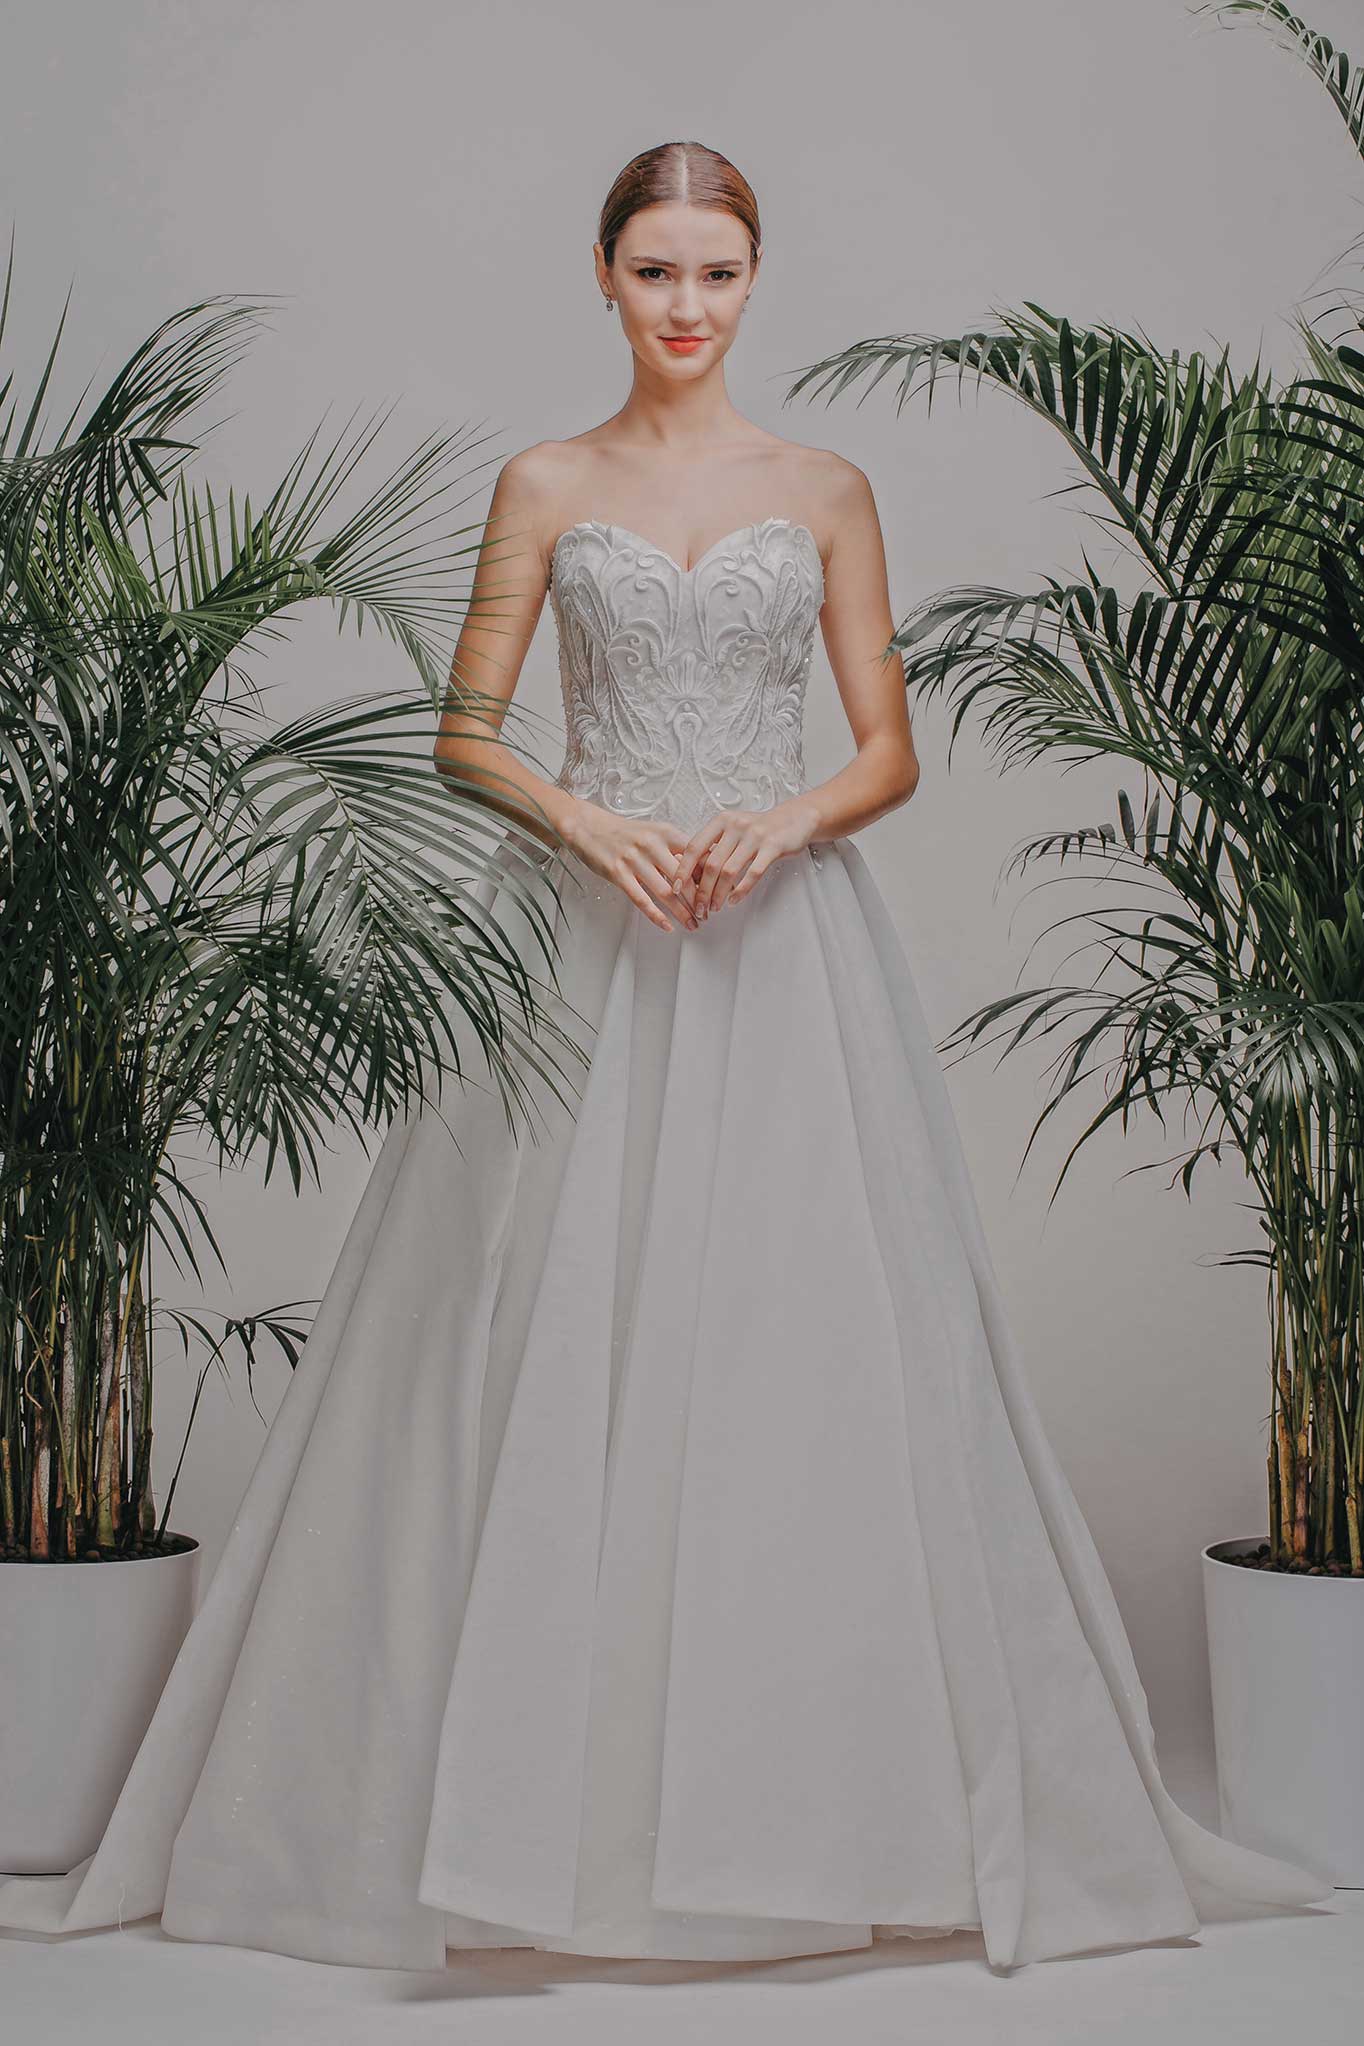 Odeliabridal-gown-collection-16_